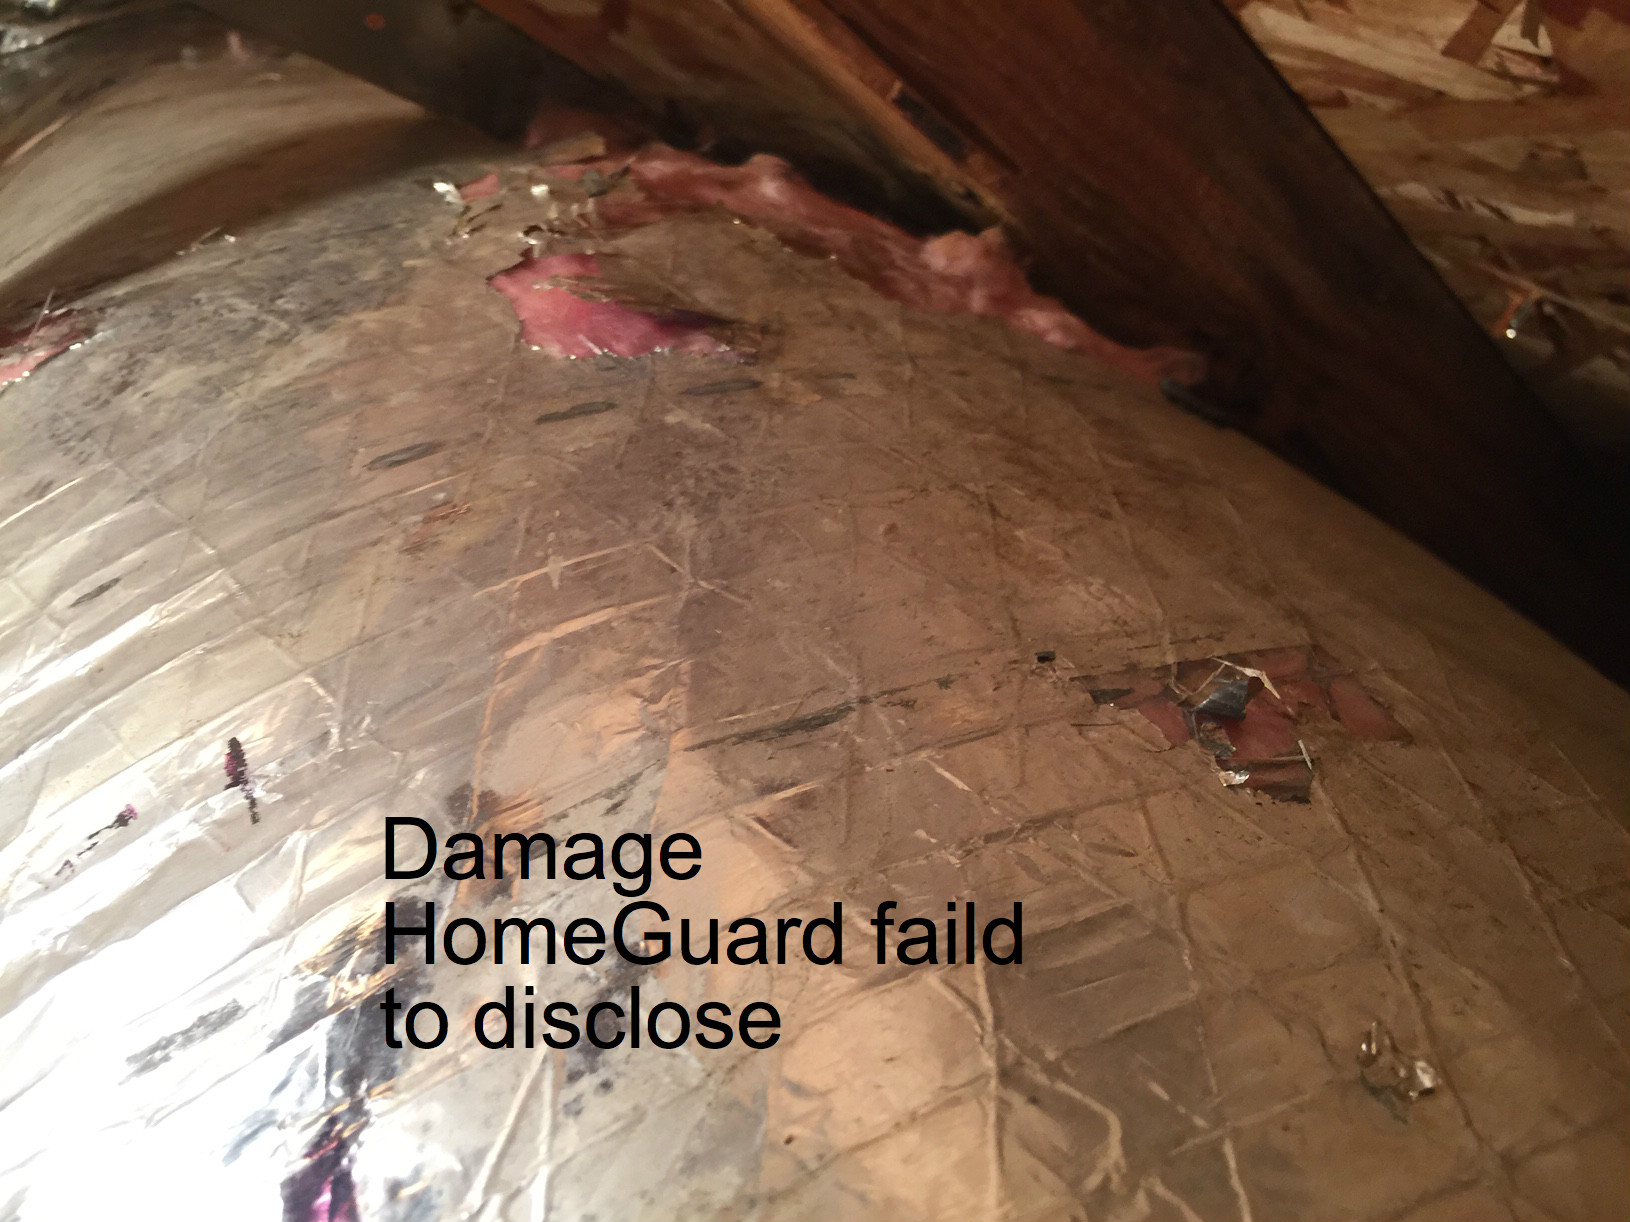 damage they failed to disclose-inital evidence of massive infestation